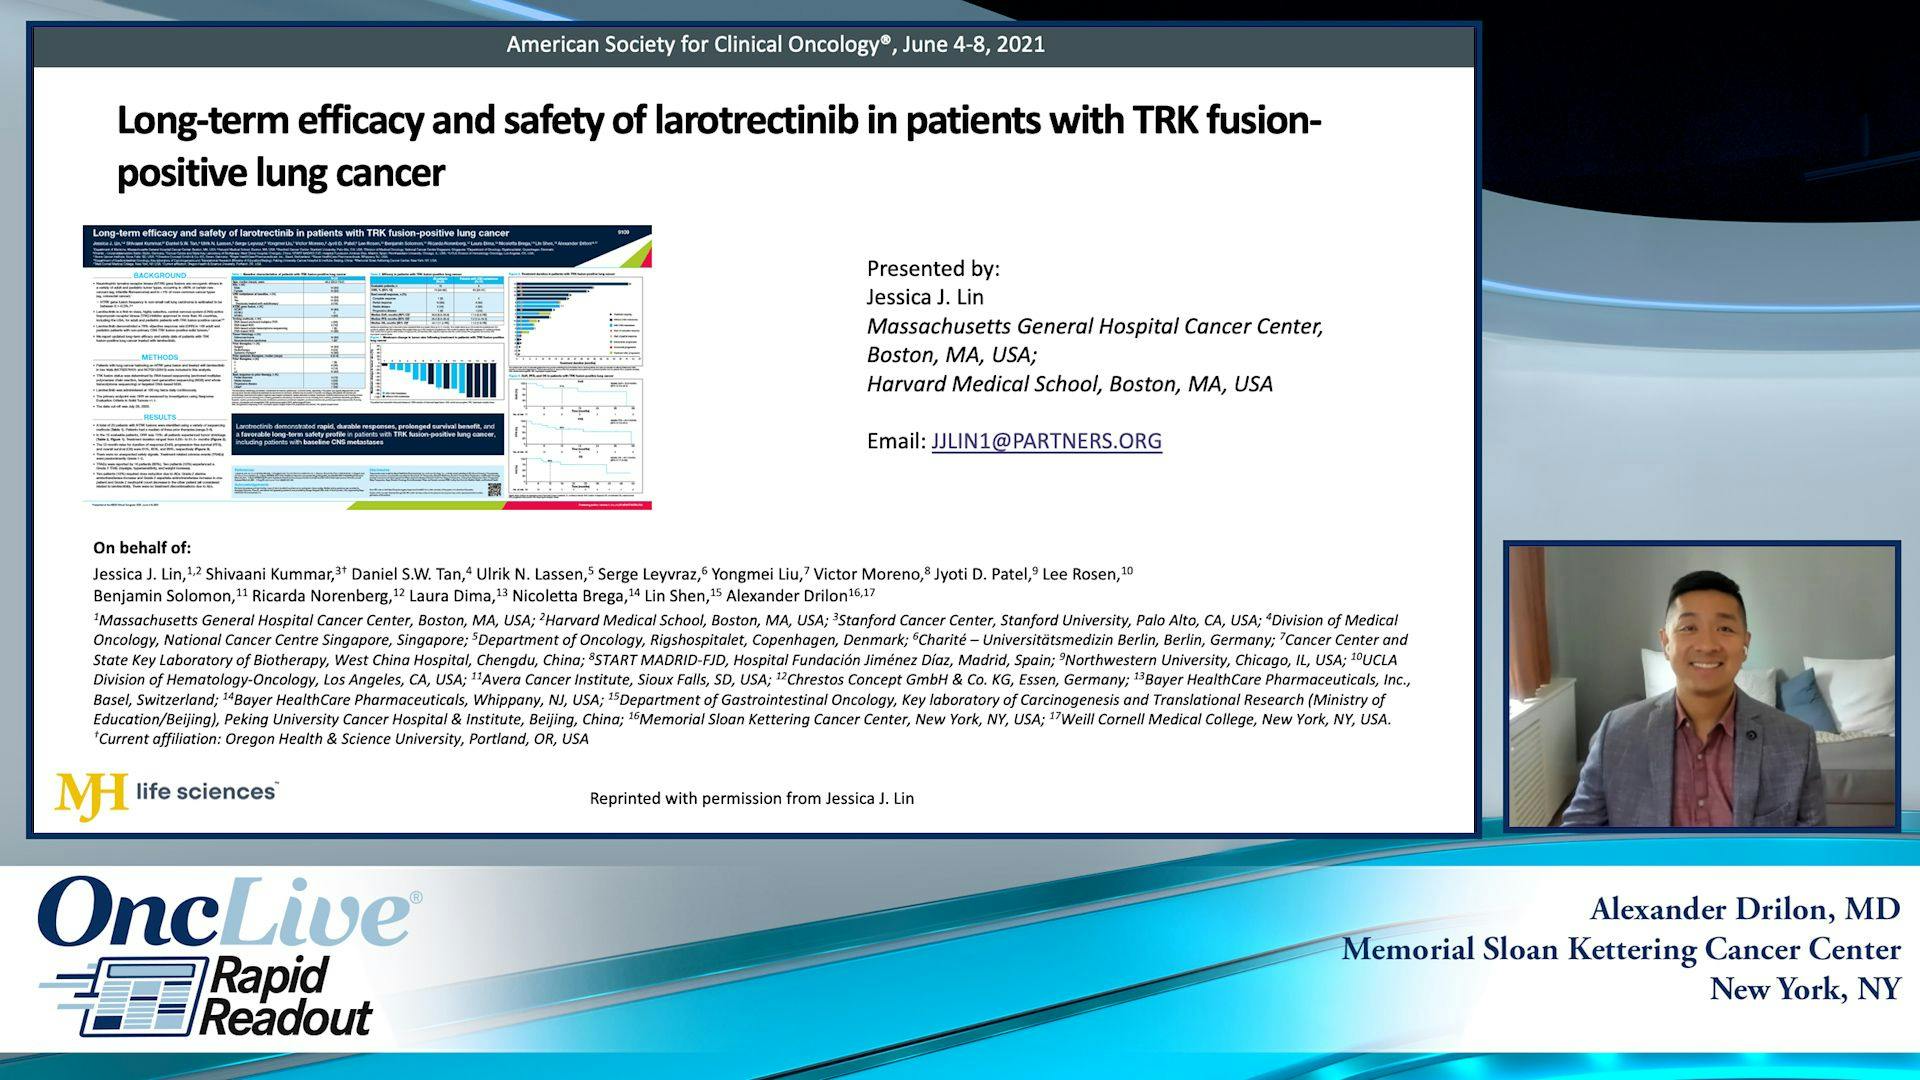 Rapid Readouts: Results from two trials of TRK inhibitor, larotrectinib, in patients with TRK fusion-positive lung cancer